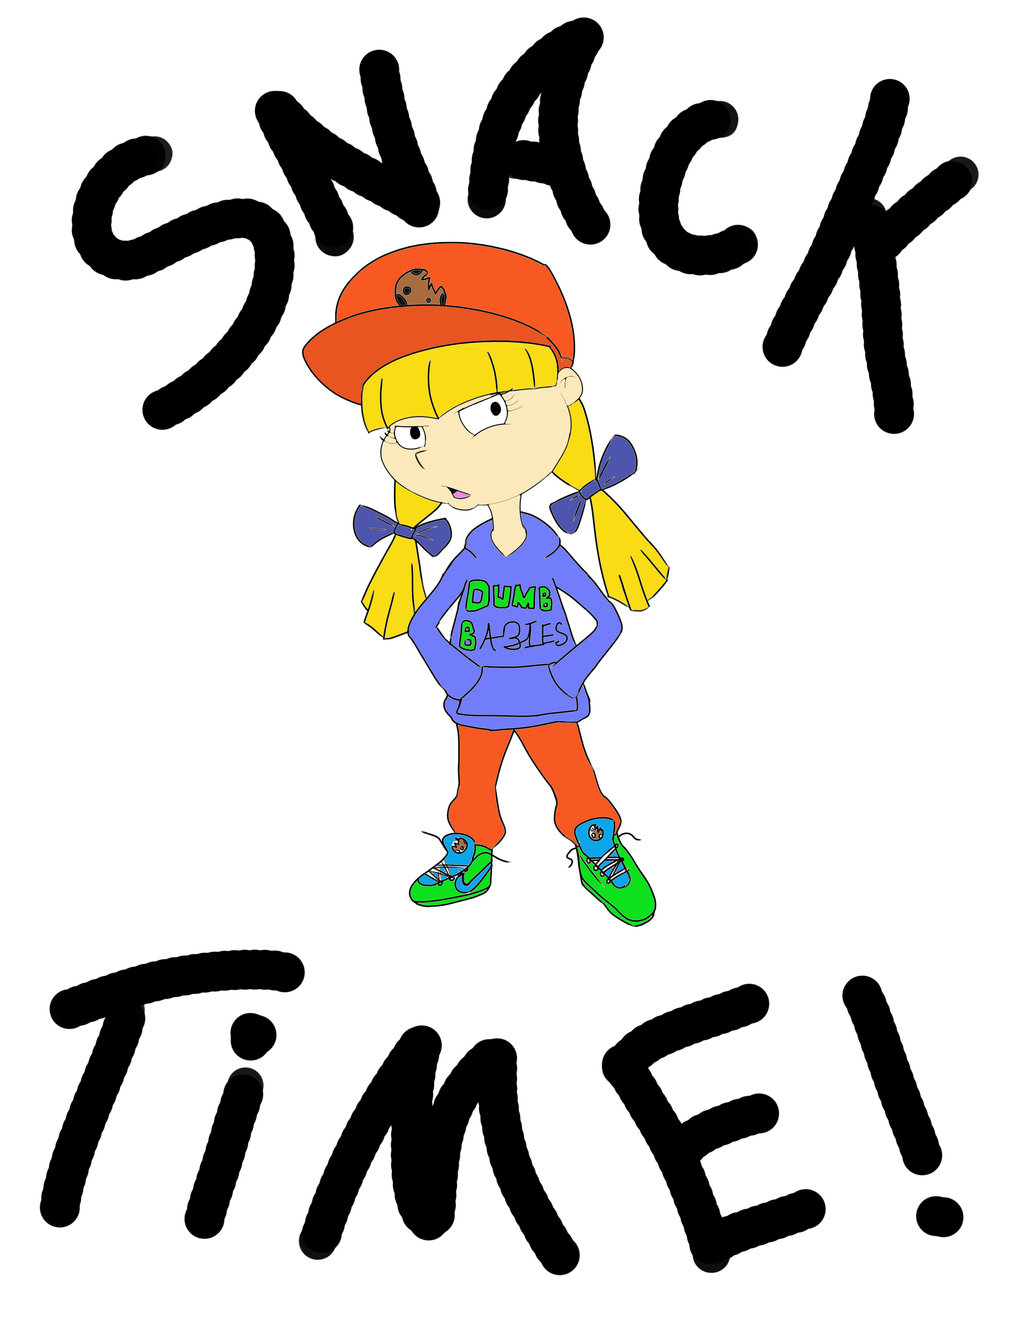 Free Eating Snack Cliparts, Download Free Clip Art, Free.